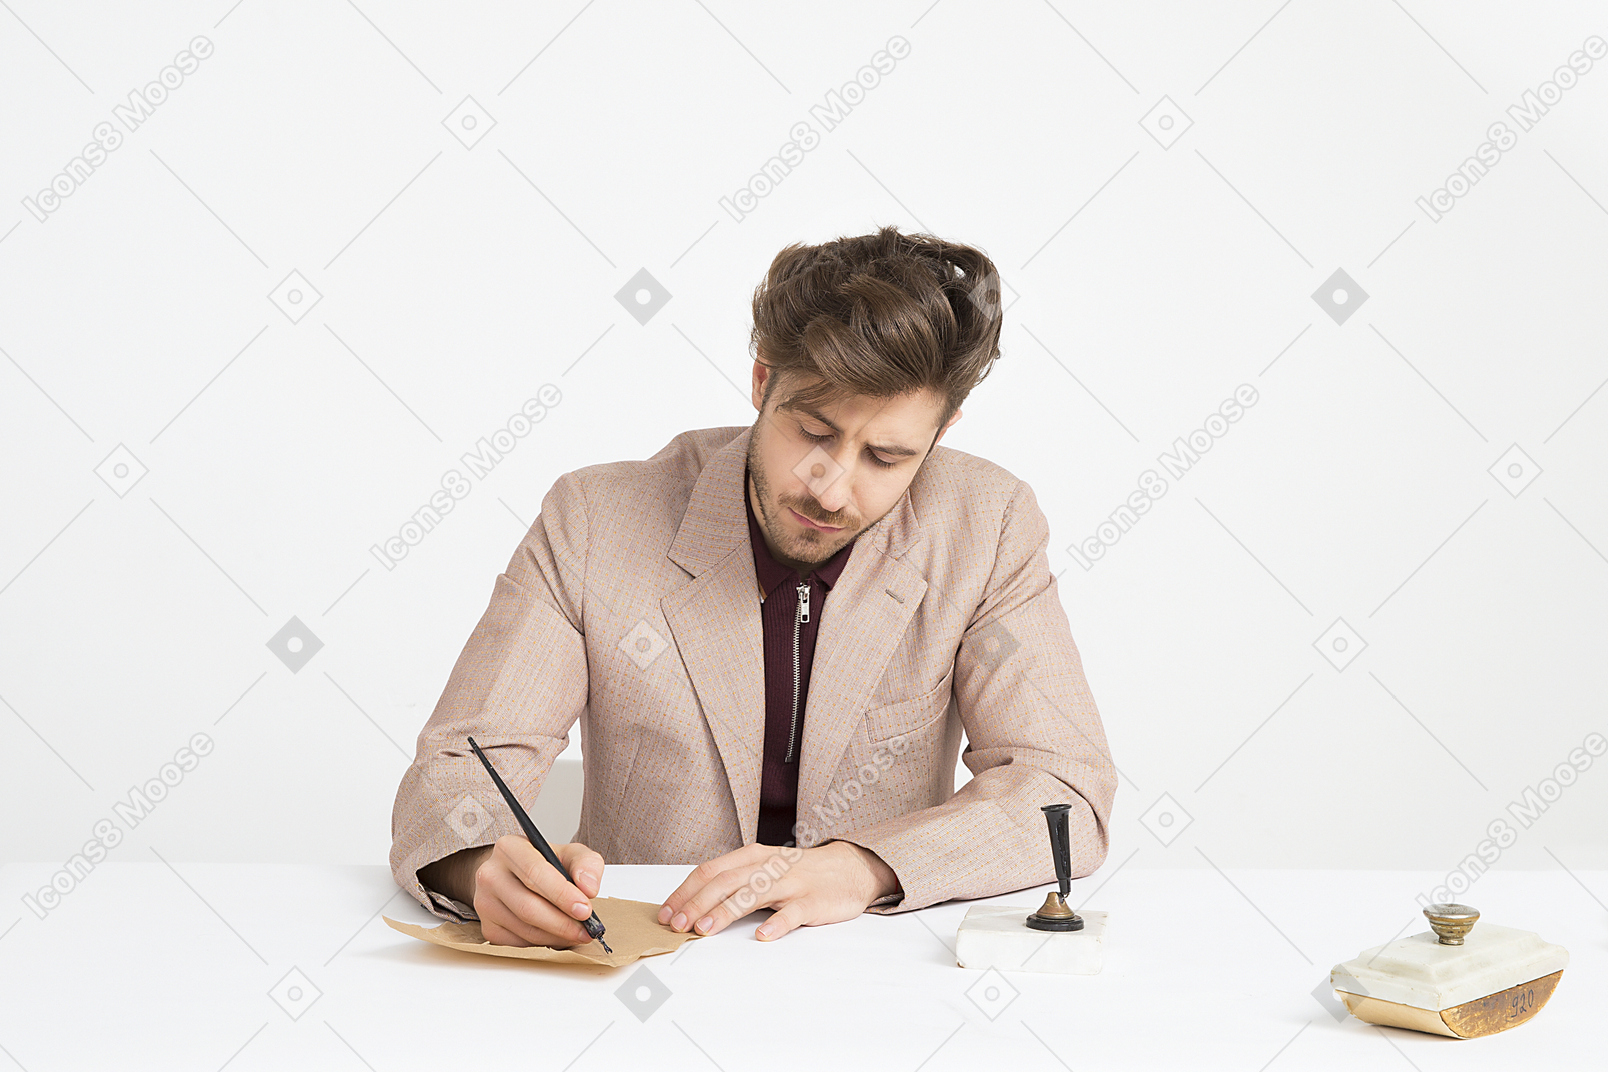 Handsome young man holding pen and writing a letter